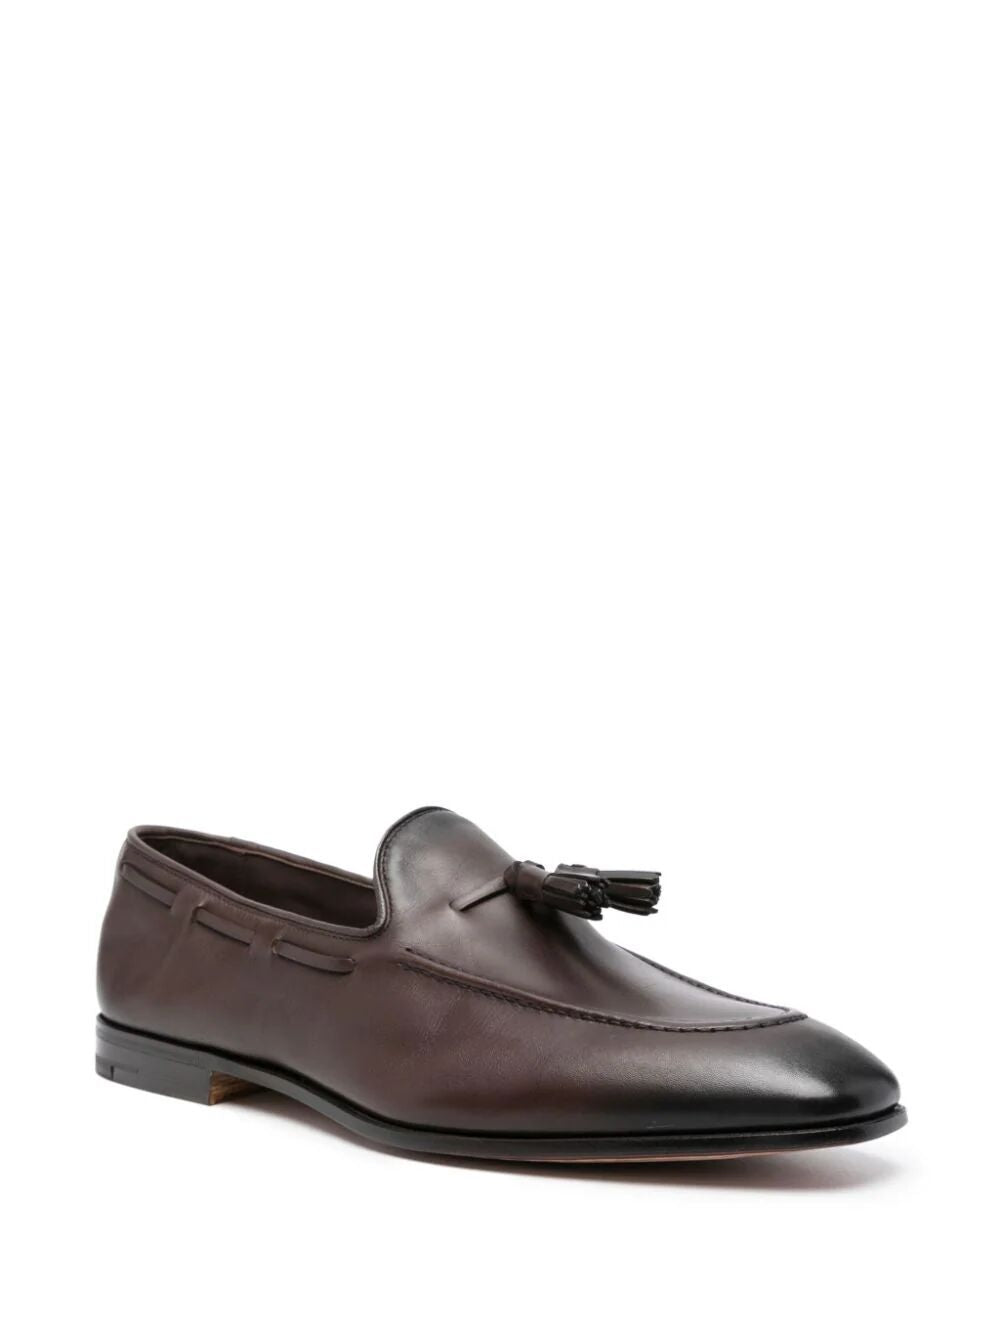 CHURCH'S Brown Calf Leather Loafers for Men - SS24 Collection